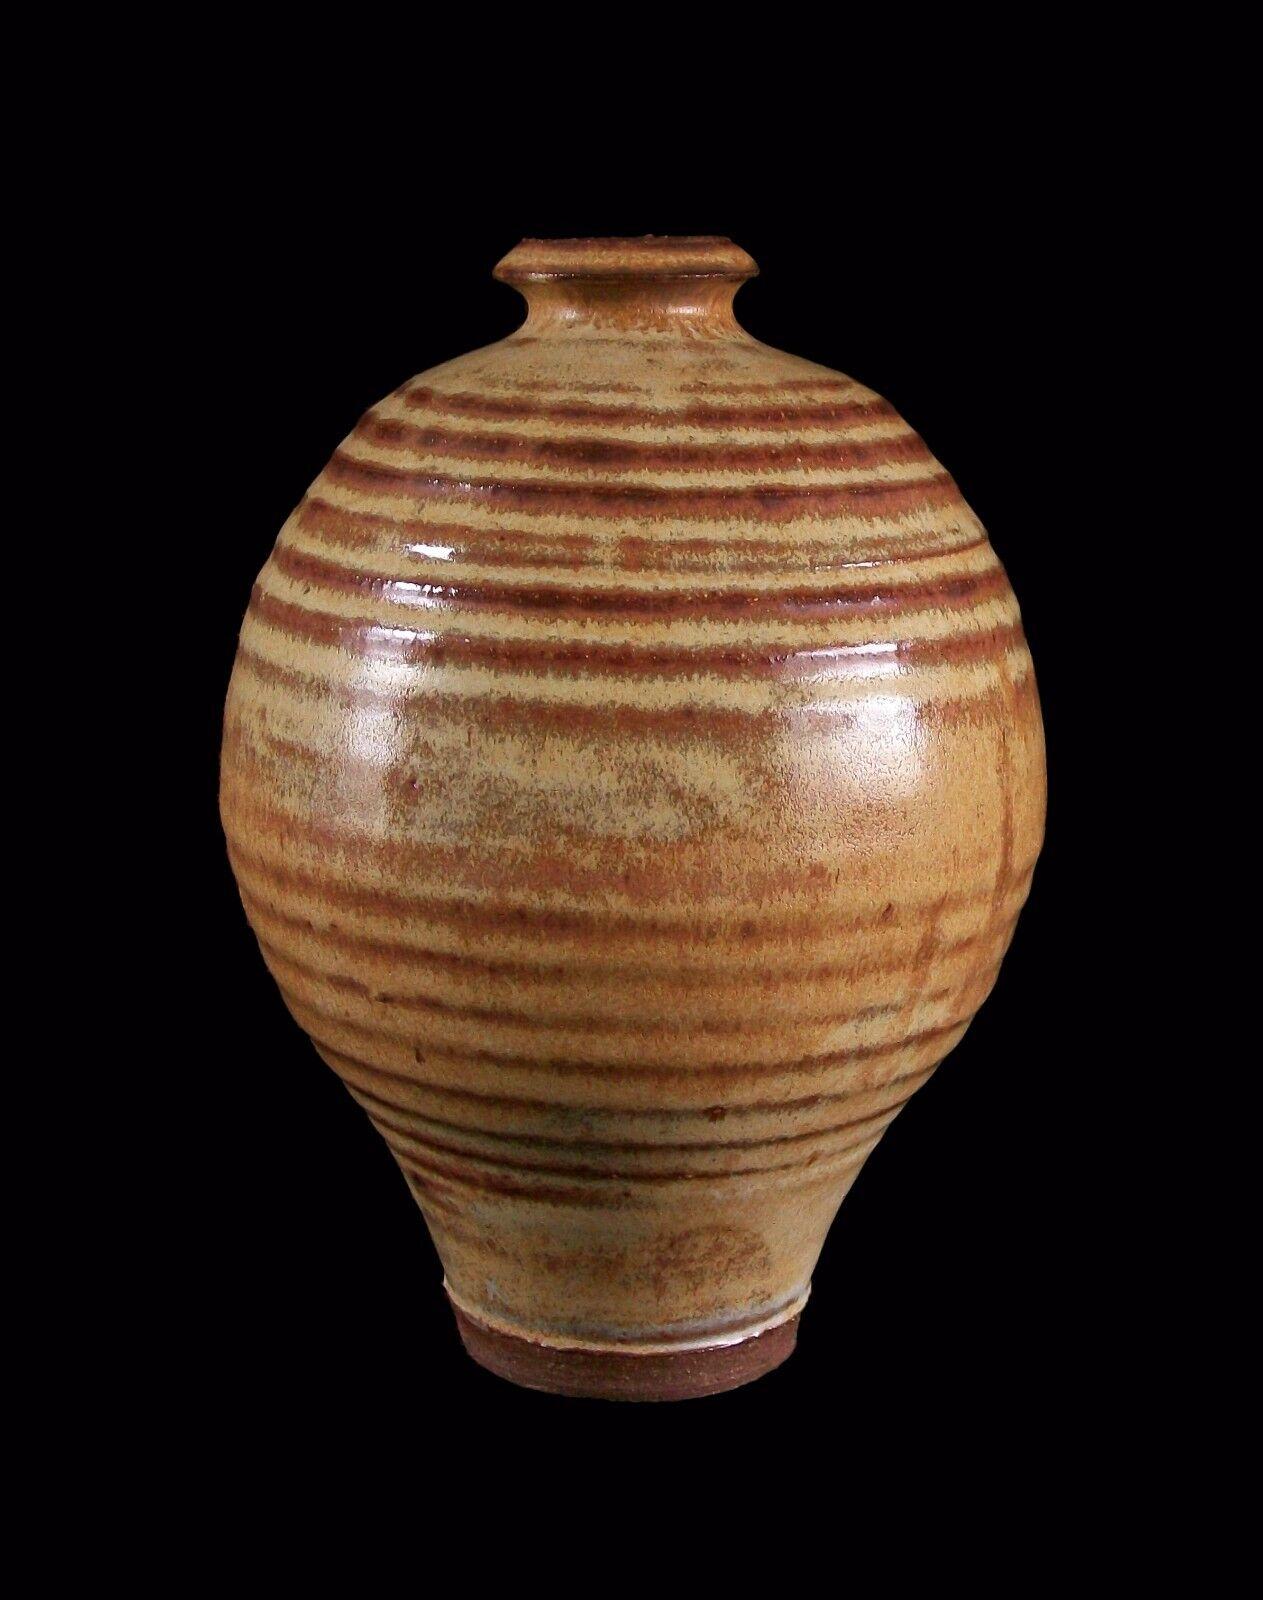 Vintage terracotta wheel thrown studio pottery vase - thick matte butterscotch glaze to the exterior stopping precisely 3/8